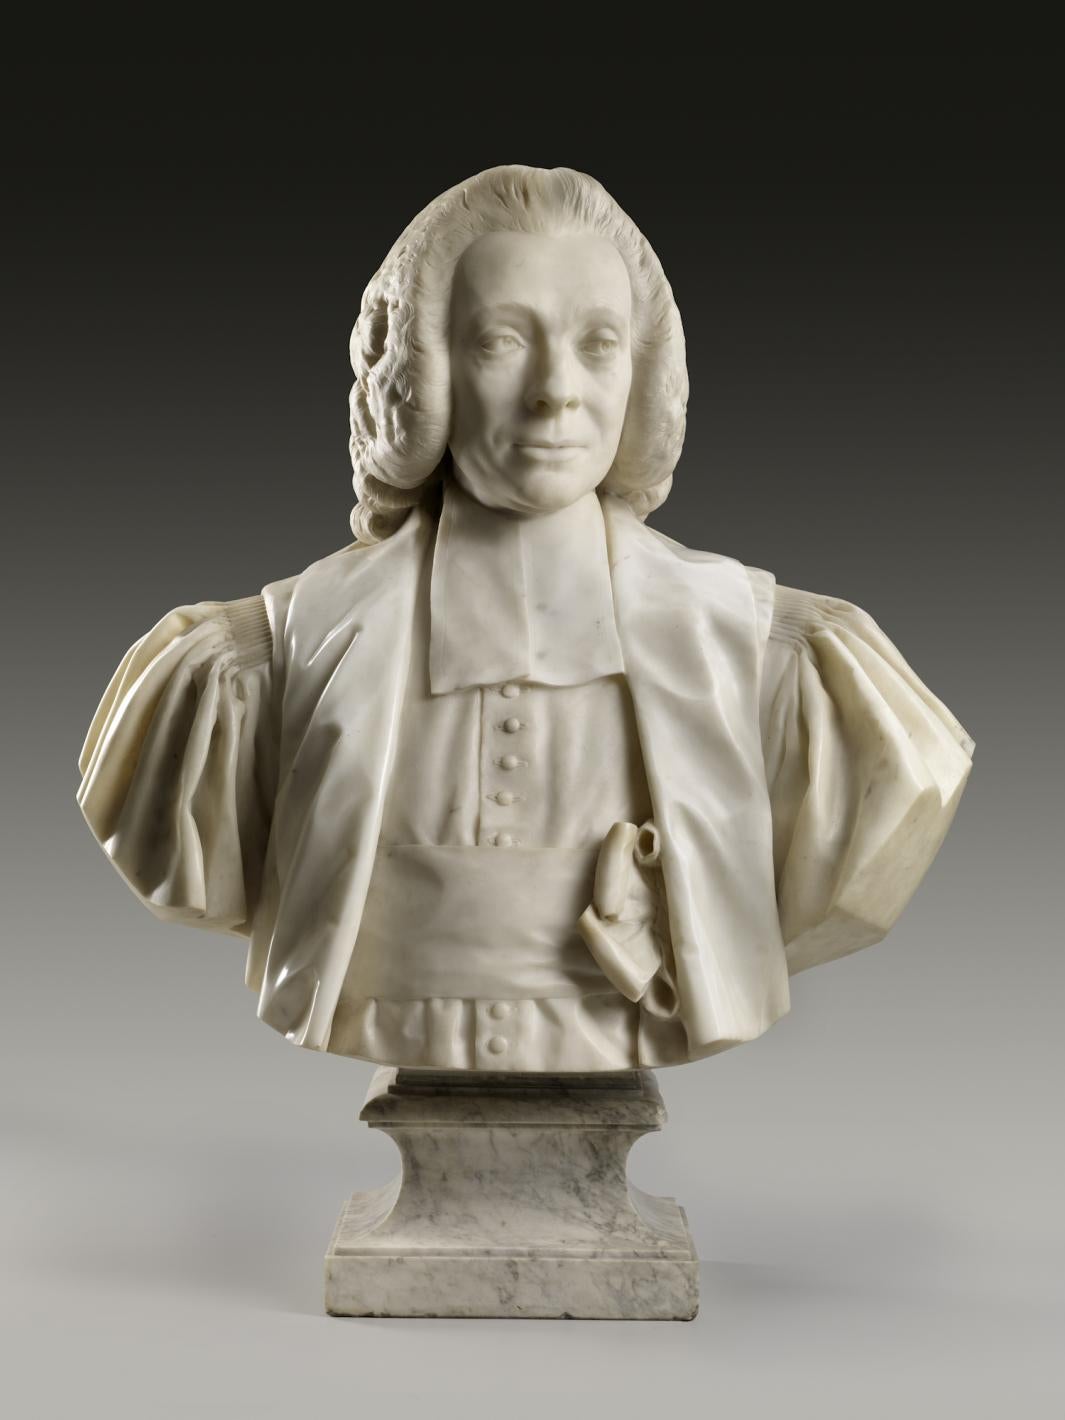 Marble bust of a man wearing a wig, robe, and bow-tied sash